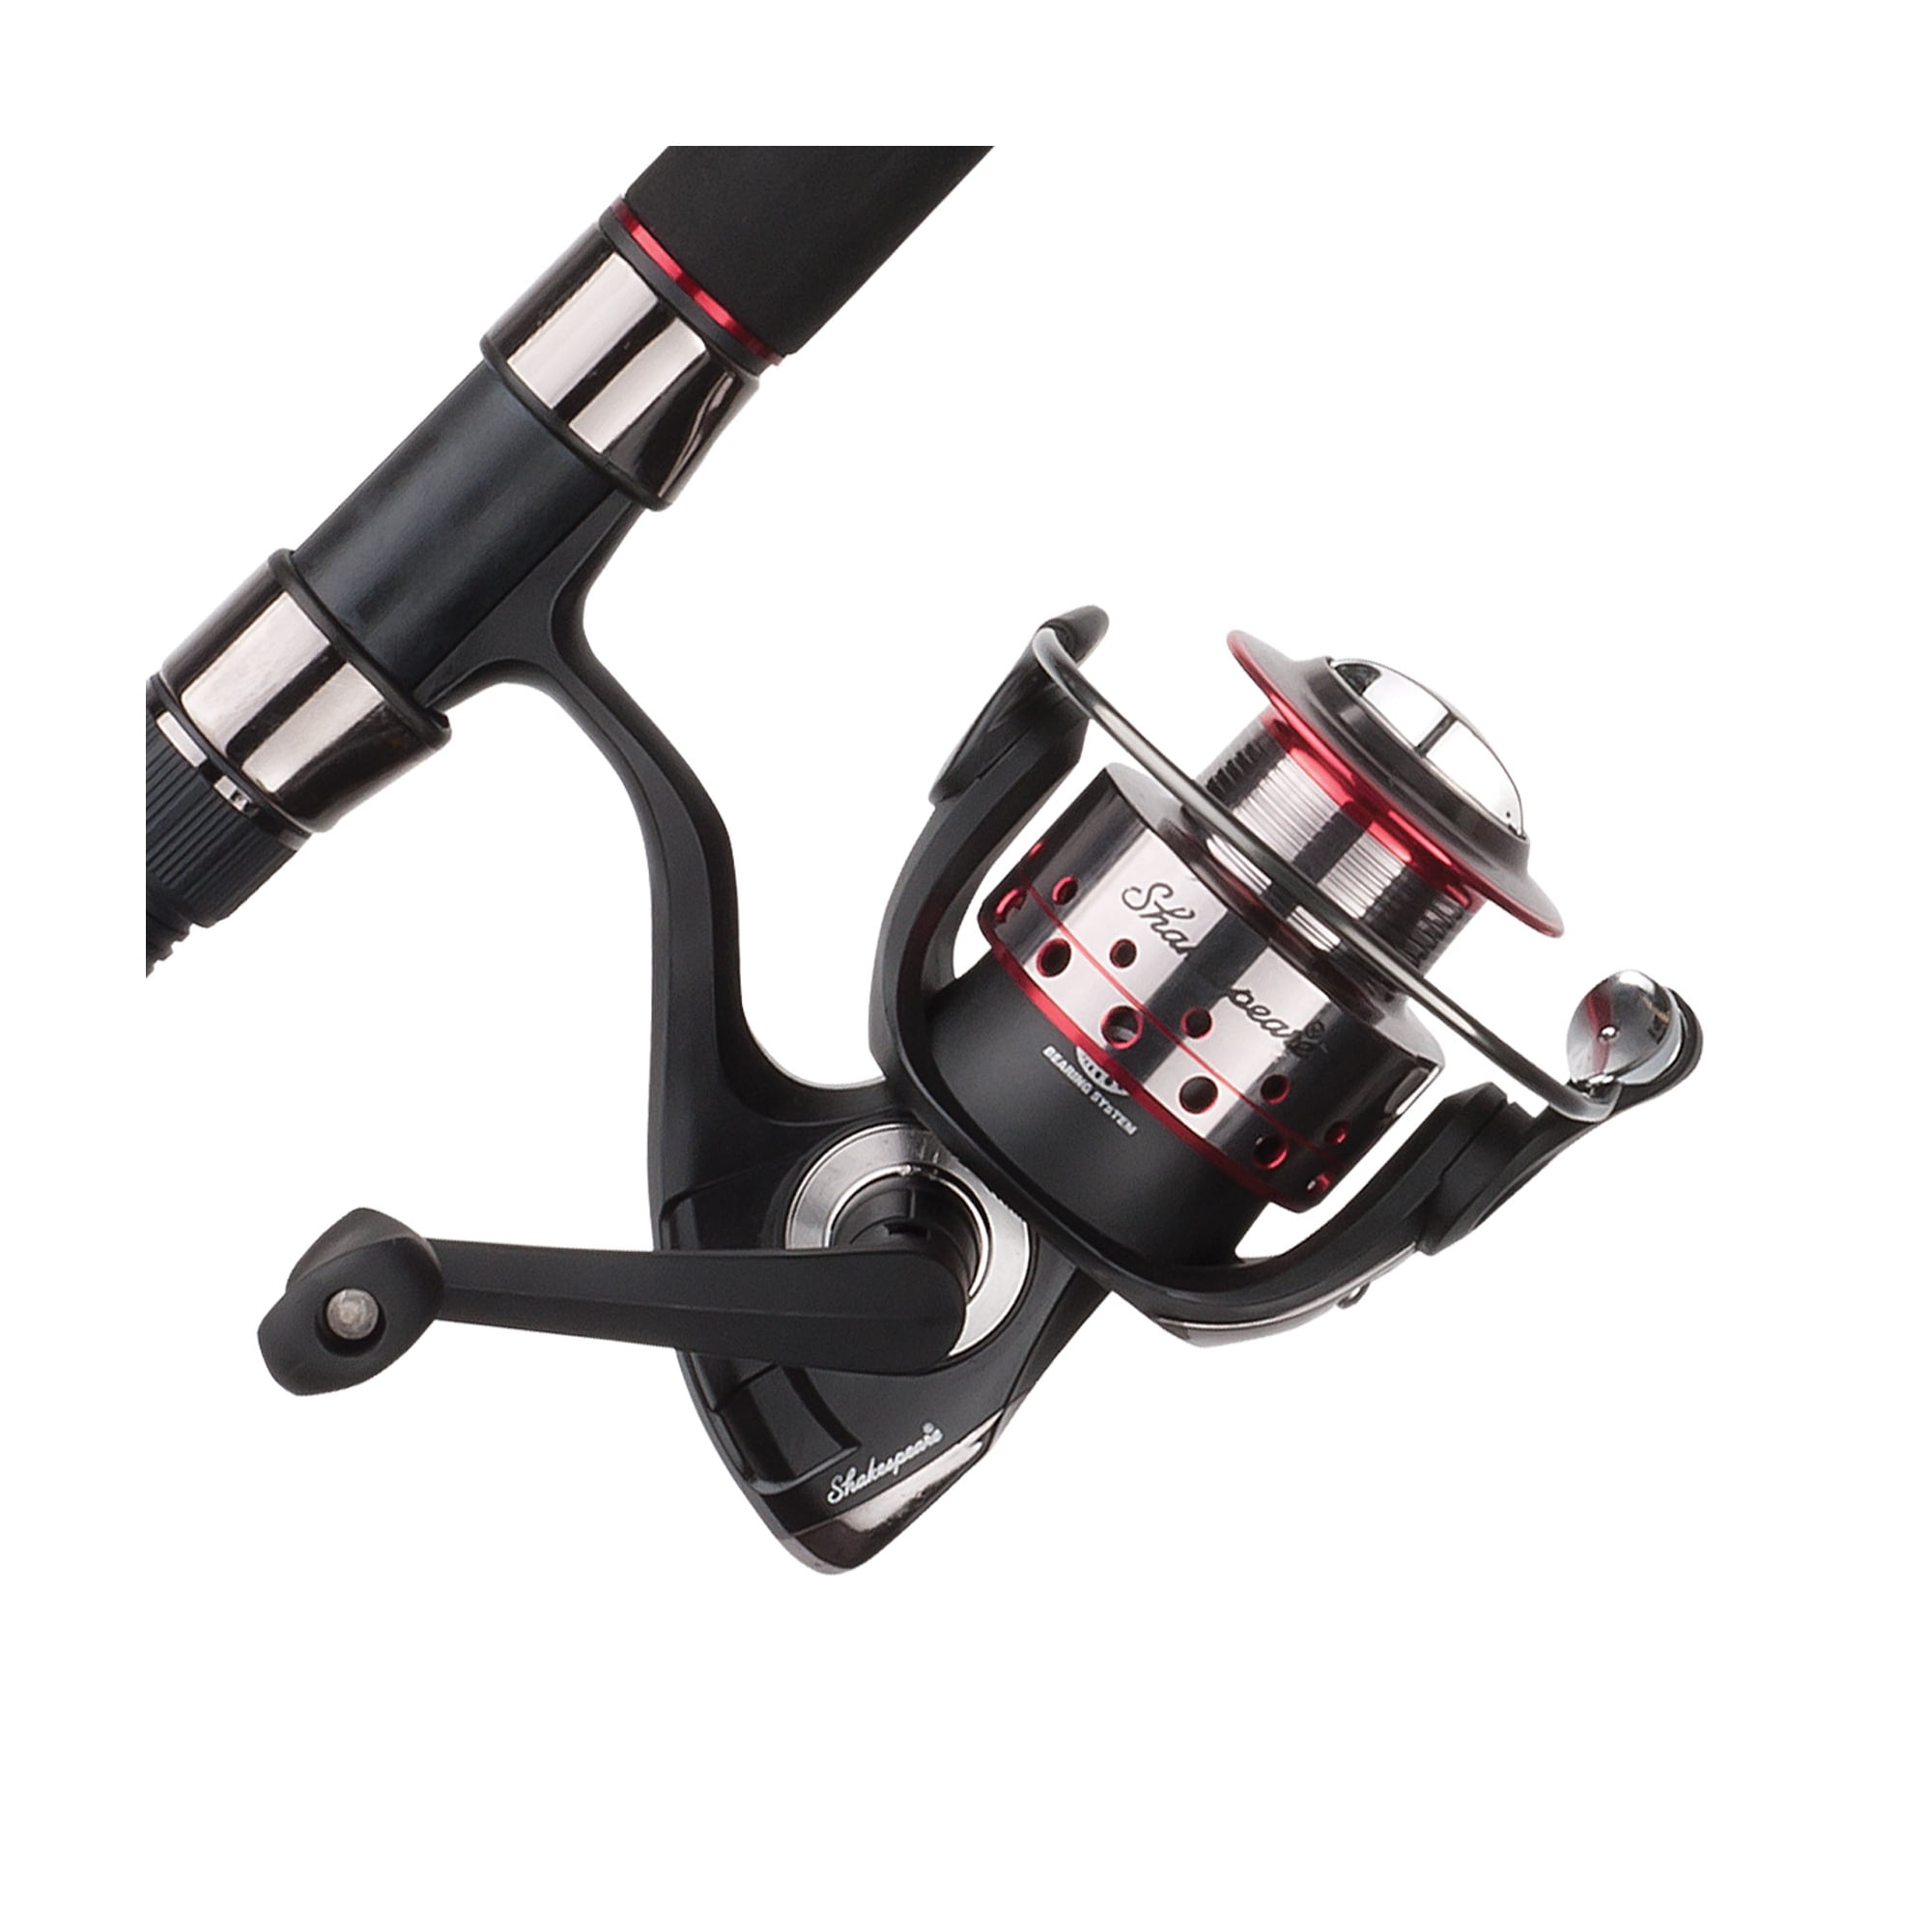 Ugly Stik USSPCAT702MH/50CBO Catfish Spinning Combo, 50 Reel, 7 ft L Rod,  5.1:1 Gear Ratio, Oversized Knob Handle, White D&B Supply